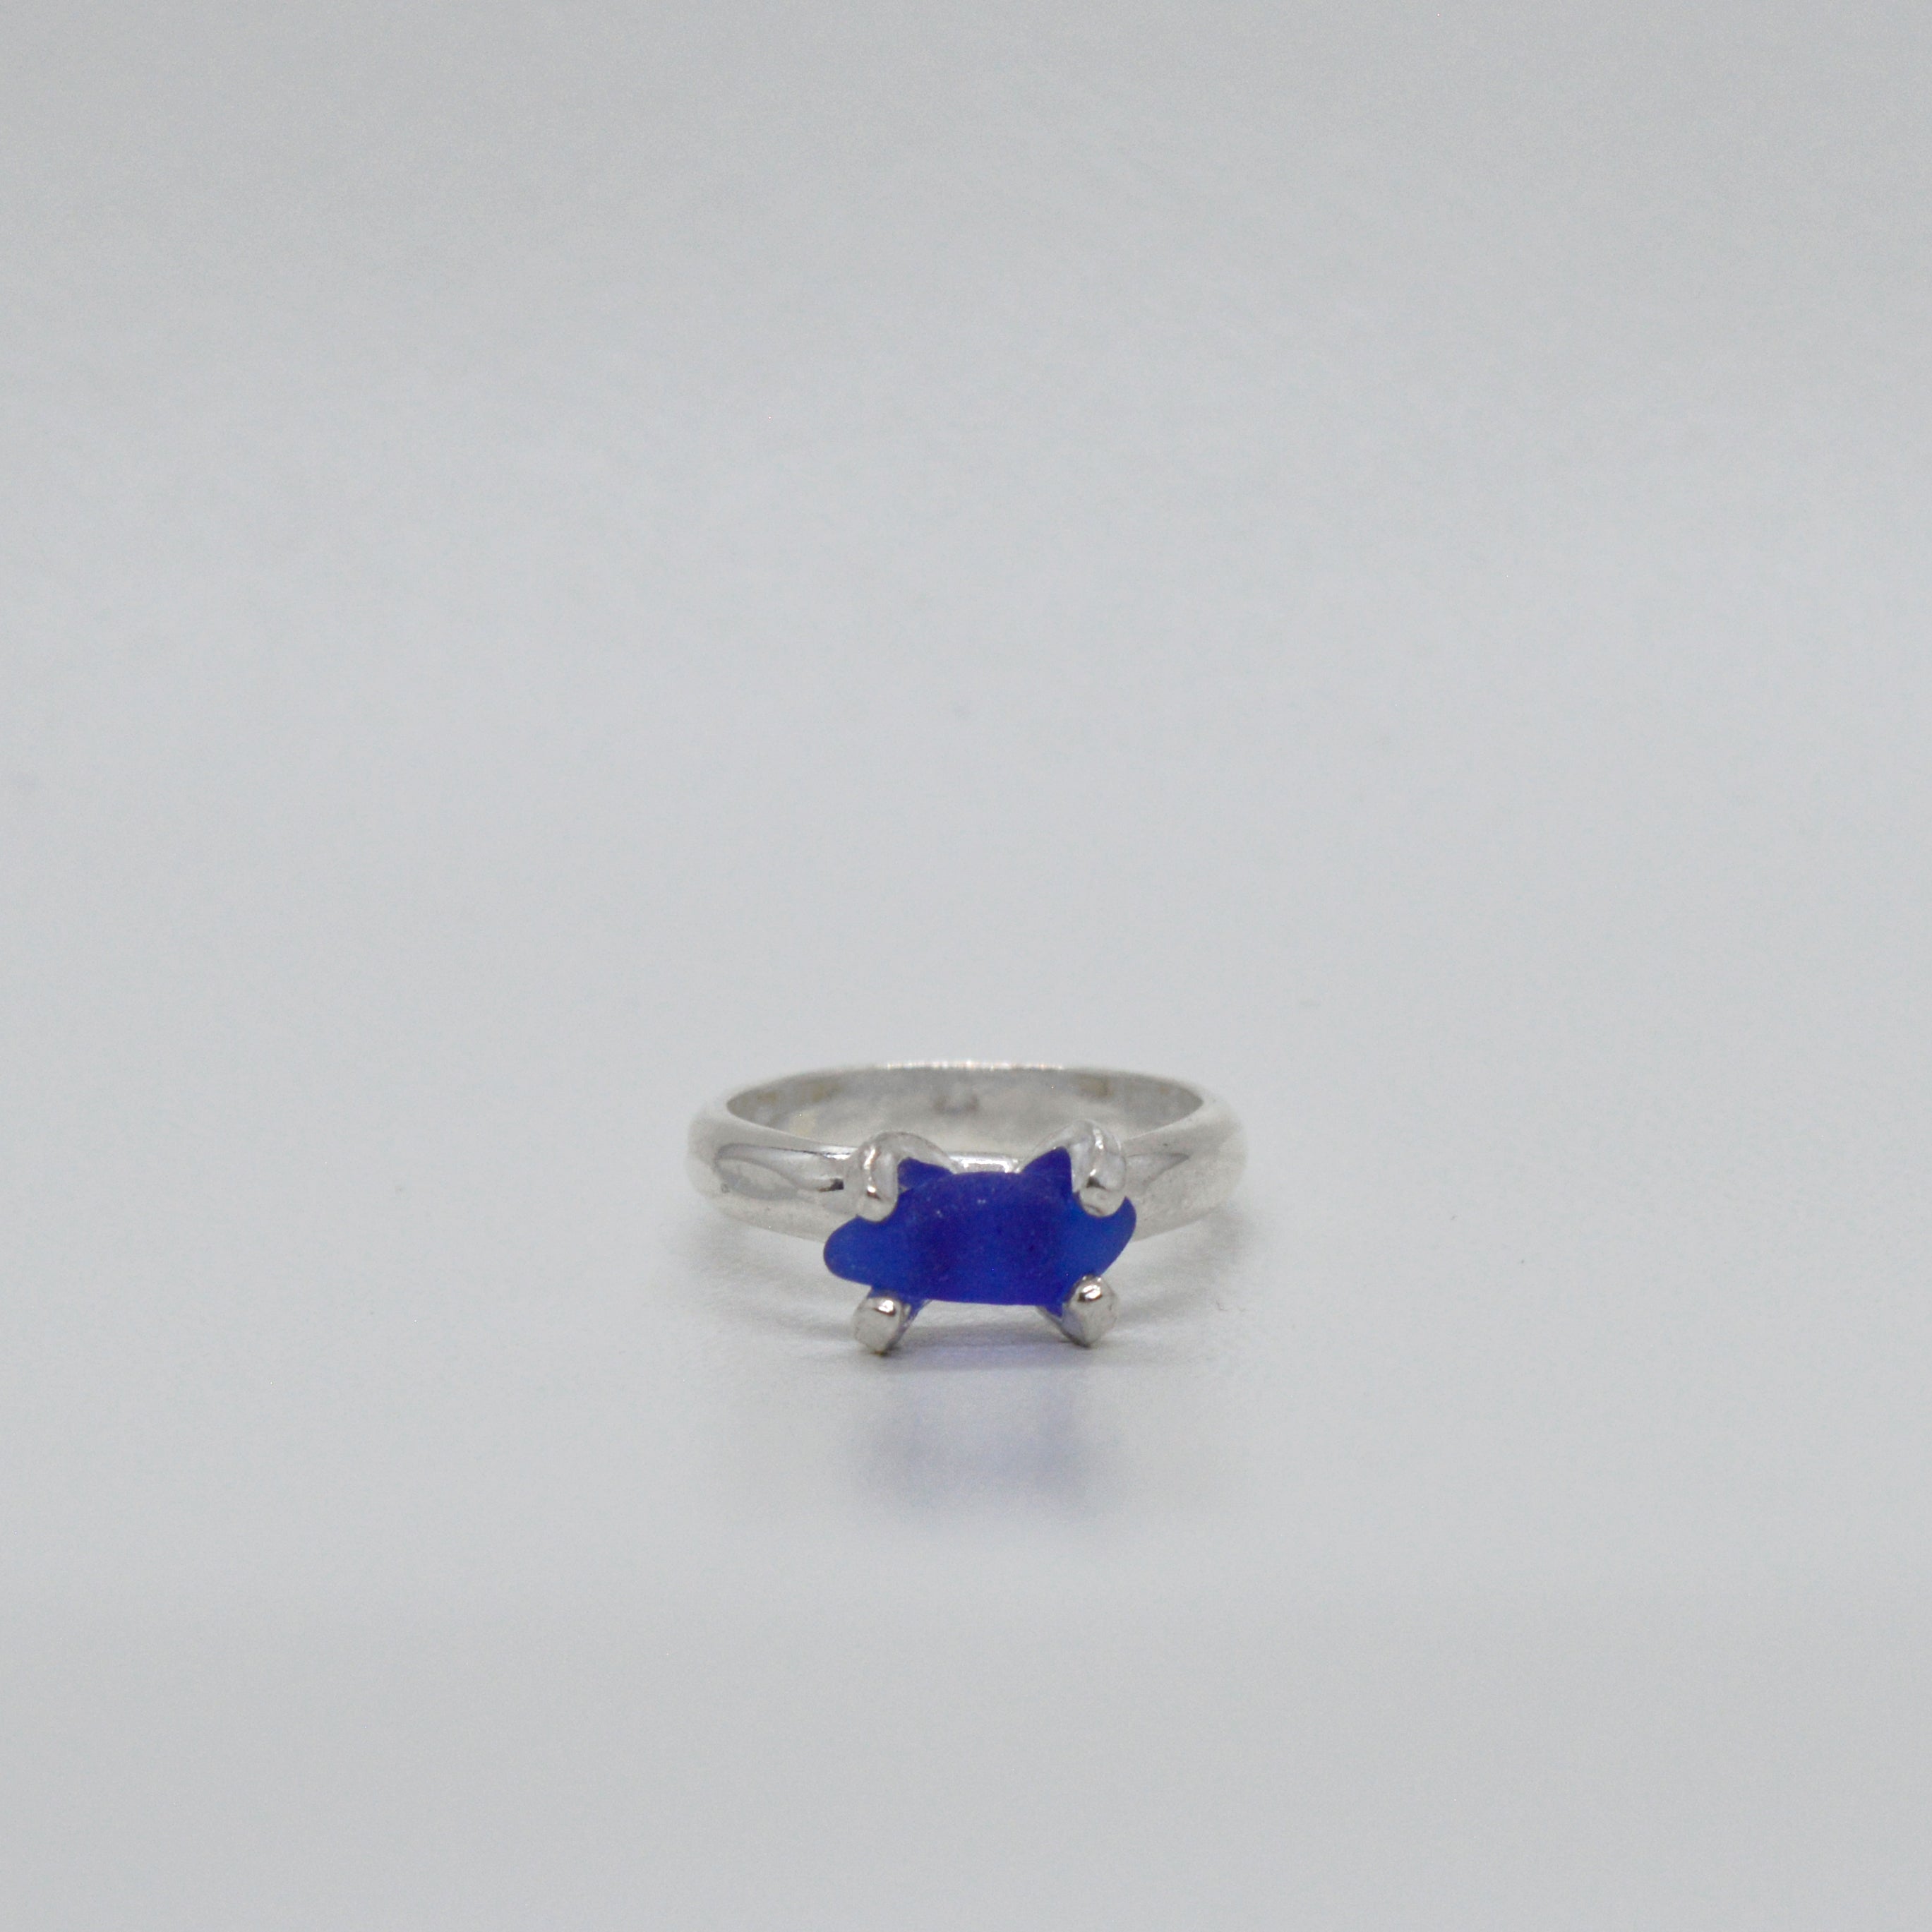 Blue Pronged Sterling Silver Seaglass Ring